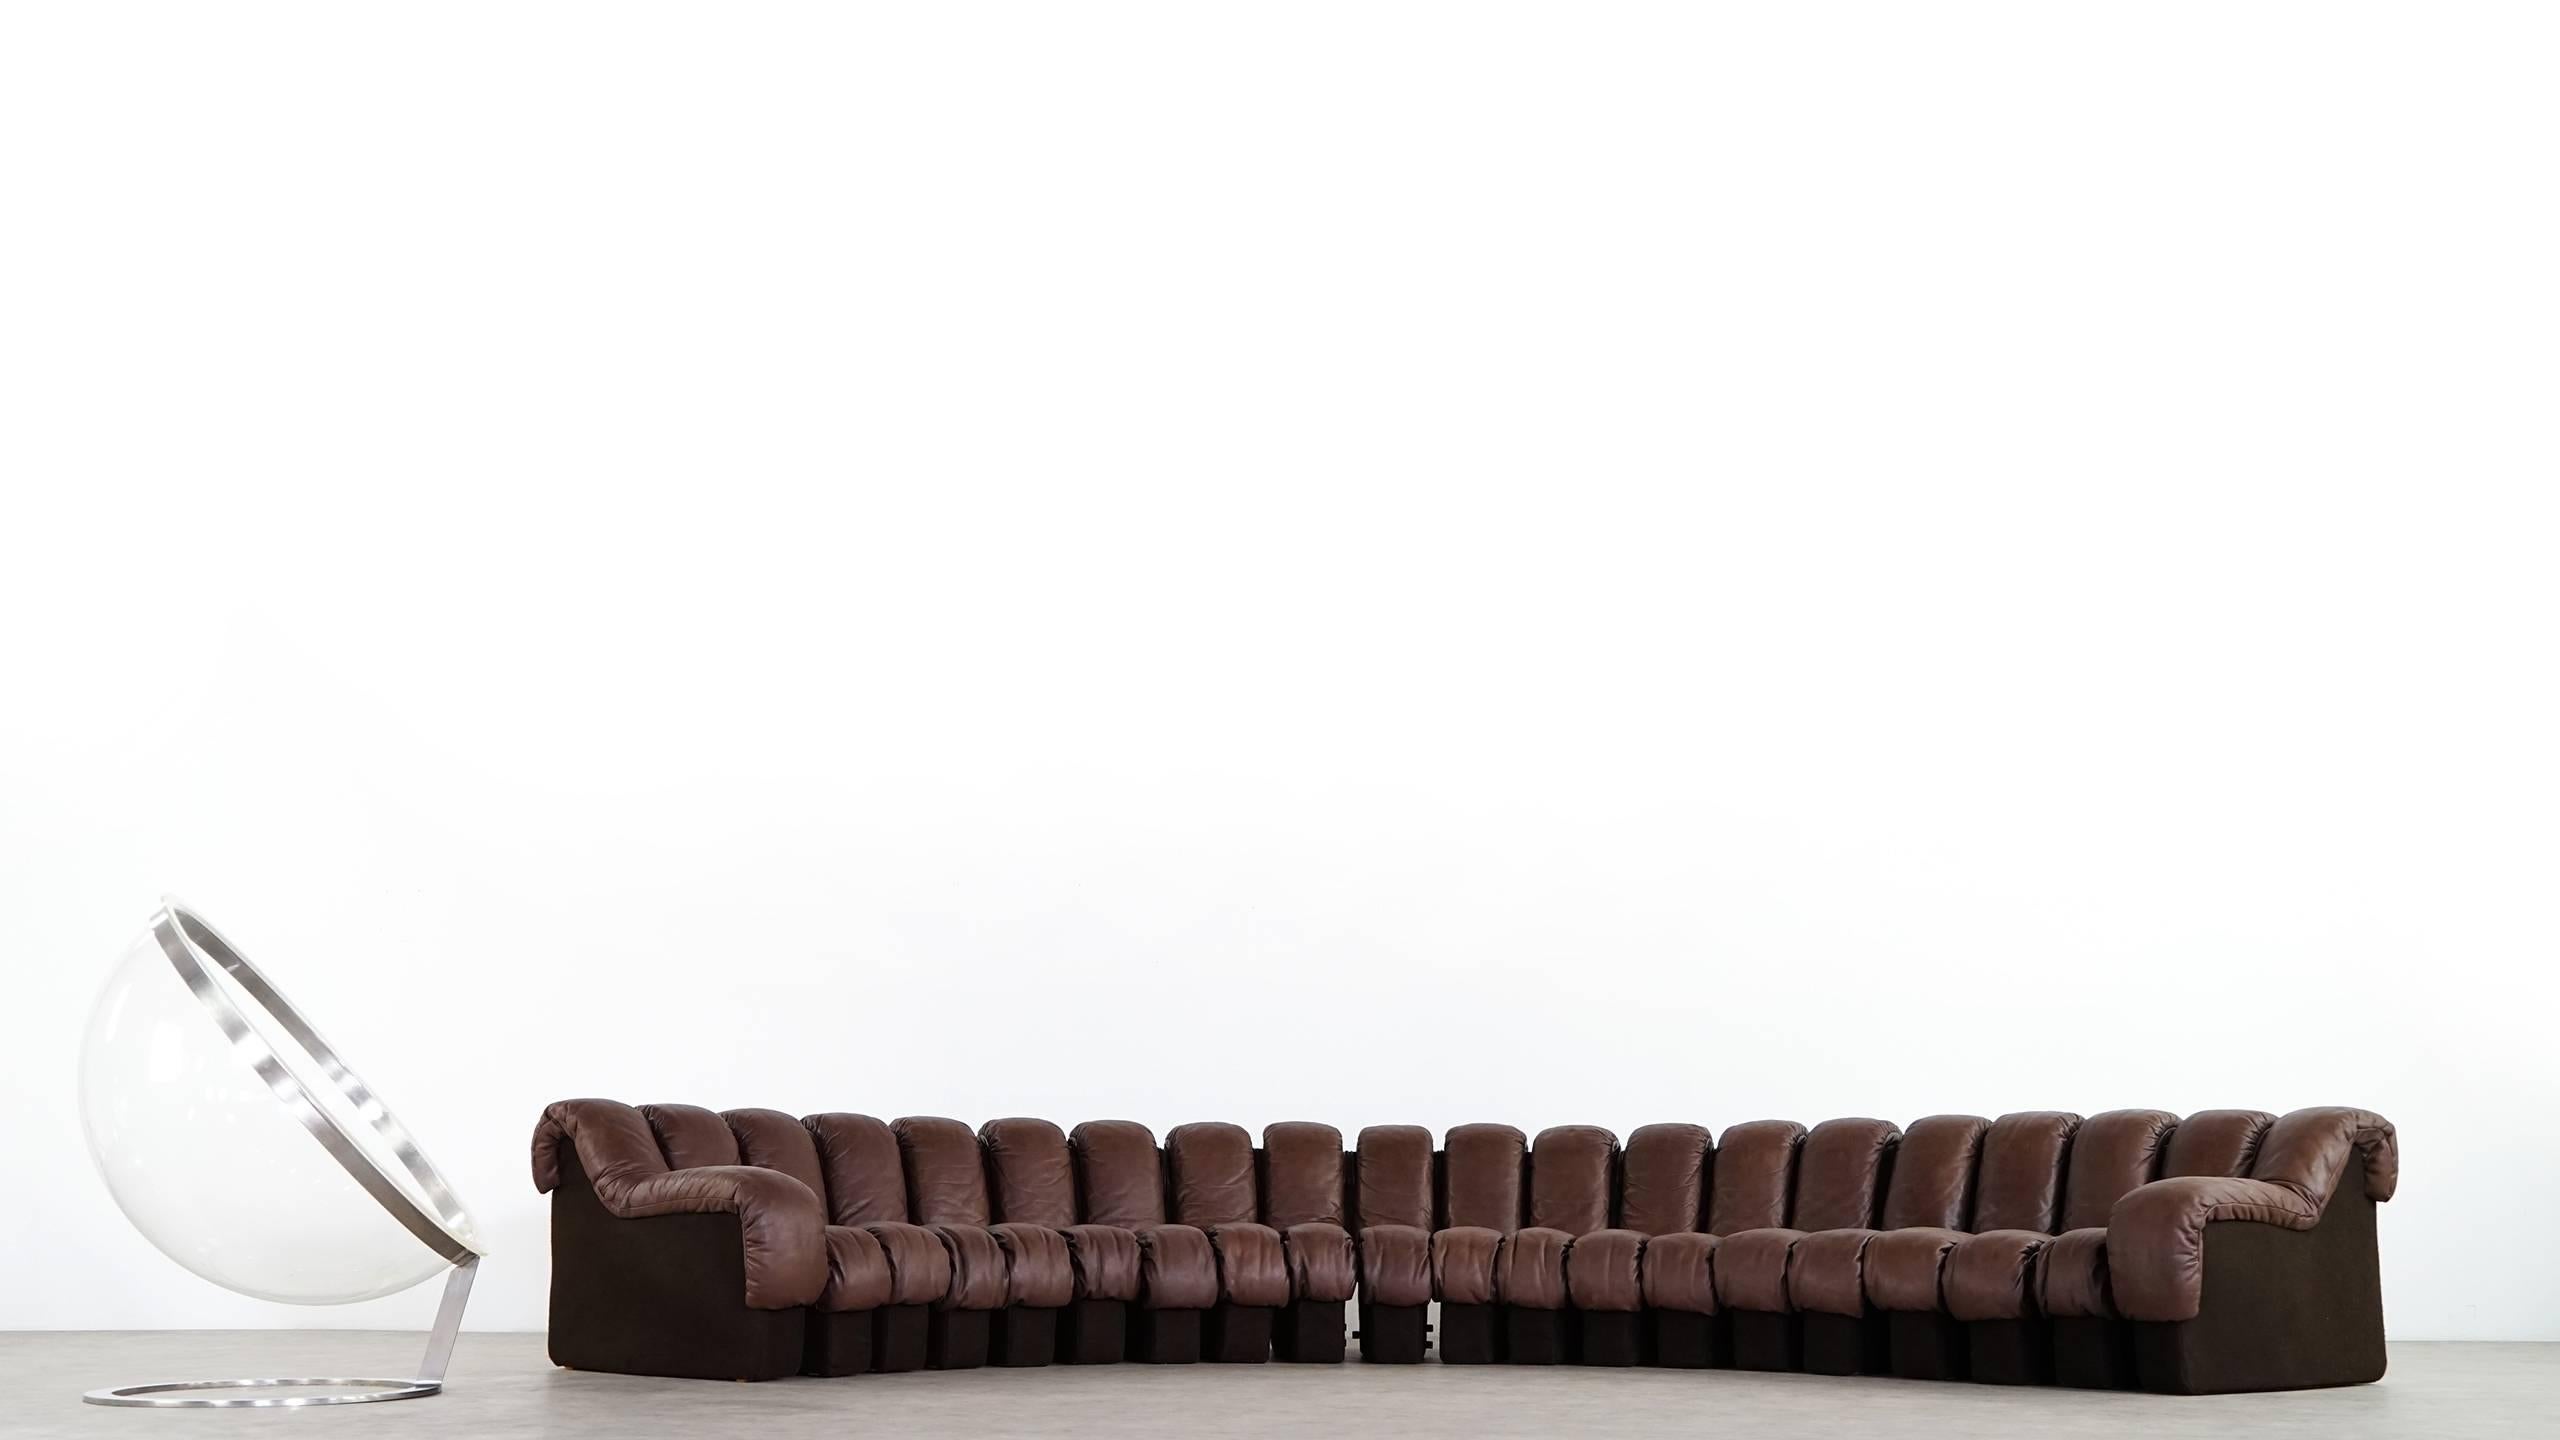 De Sede DS 600.
Design by Ueli Berger, Eleonore Peduzzi-Riva, Heinz Ulrich, Klaus Vogt, 1972.

Modulable endless highclass leather sofa. 20 elements in smooth chocolate leather! Perfect vintage condition. With very nice patina!
Non-stop, endless